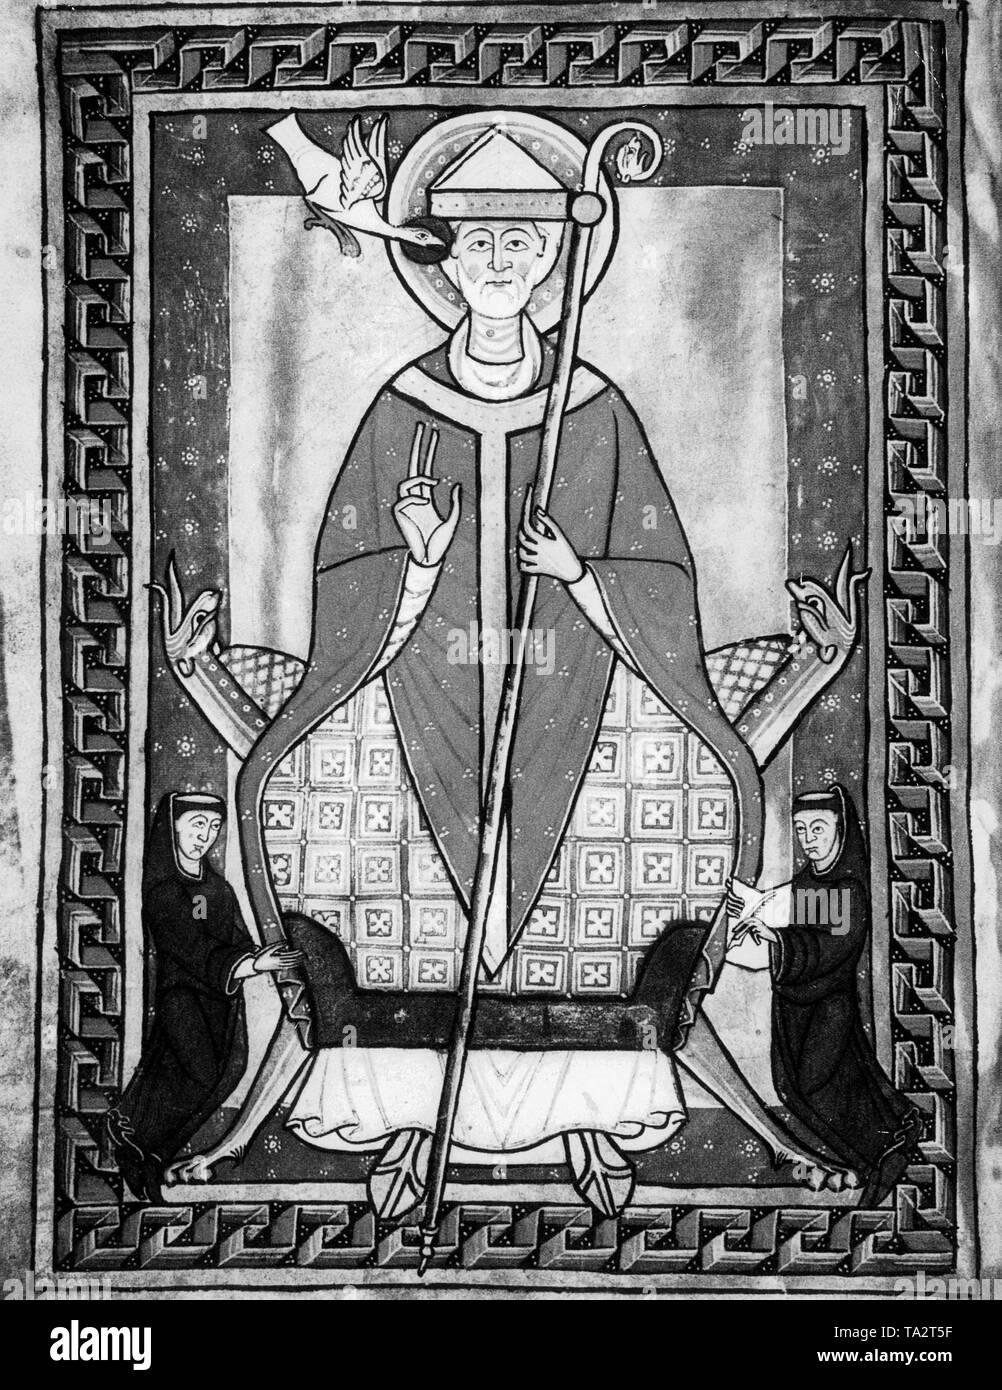 A miniature showing Pope Gregory VII (real name Hildebrand, lived between 1019-1085, Pope from 1073 to 1085). The miniature is from the manuscripts of Gregory VII. Stock Photo